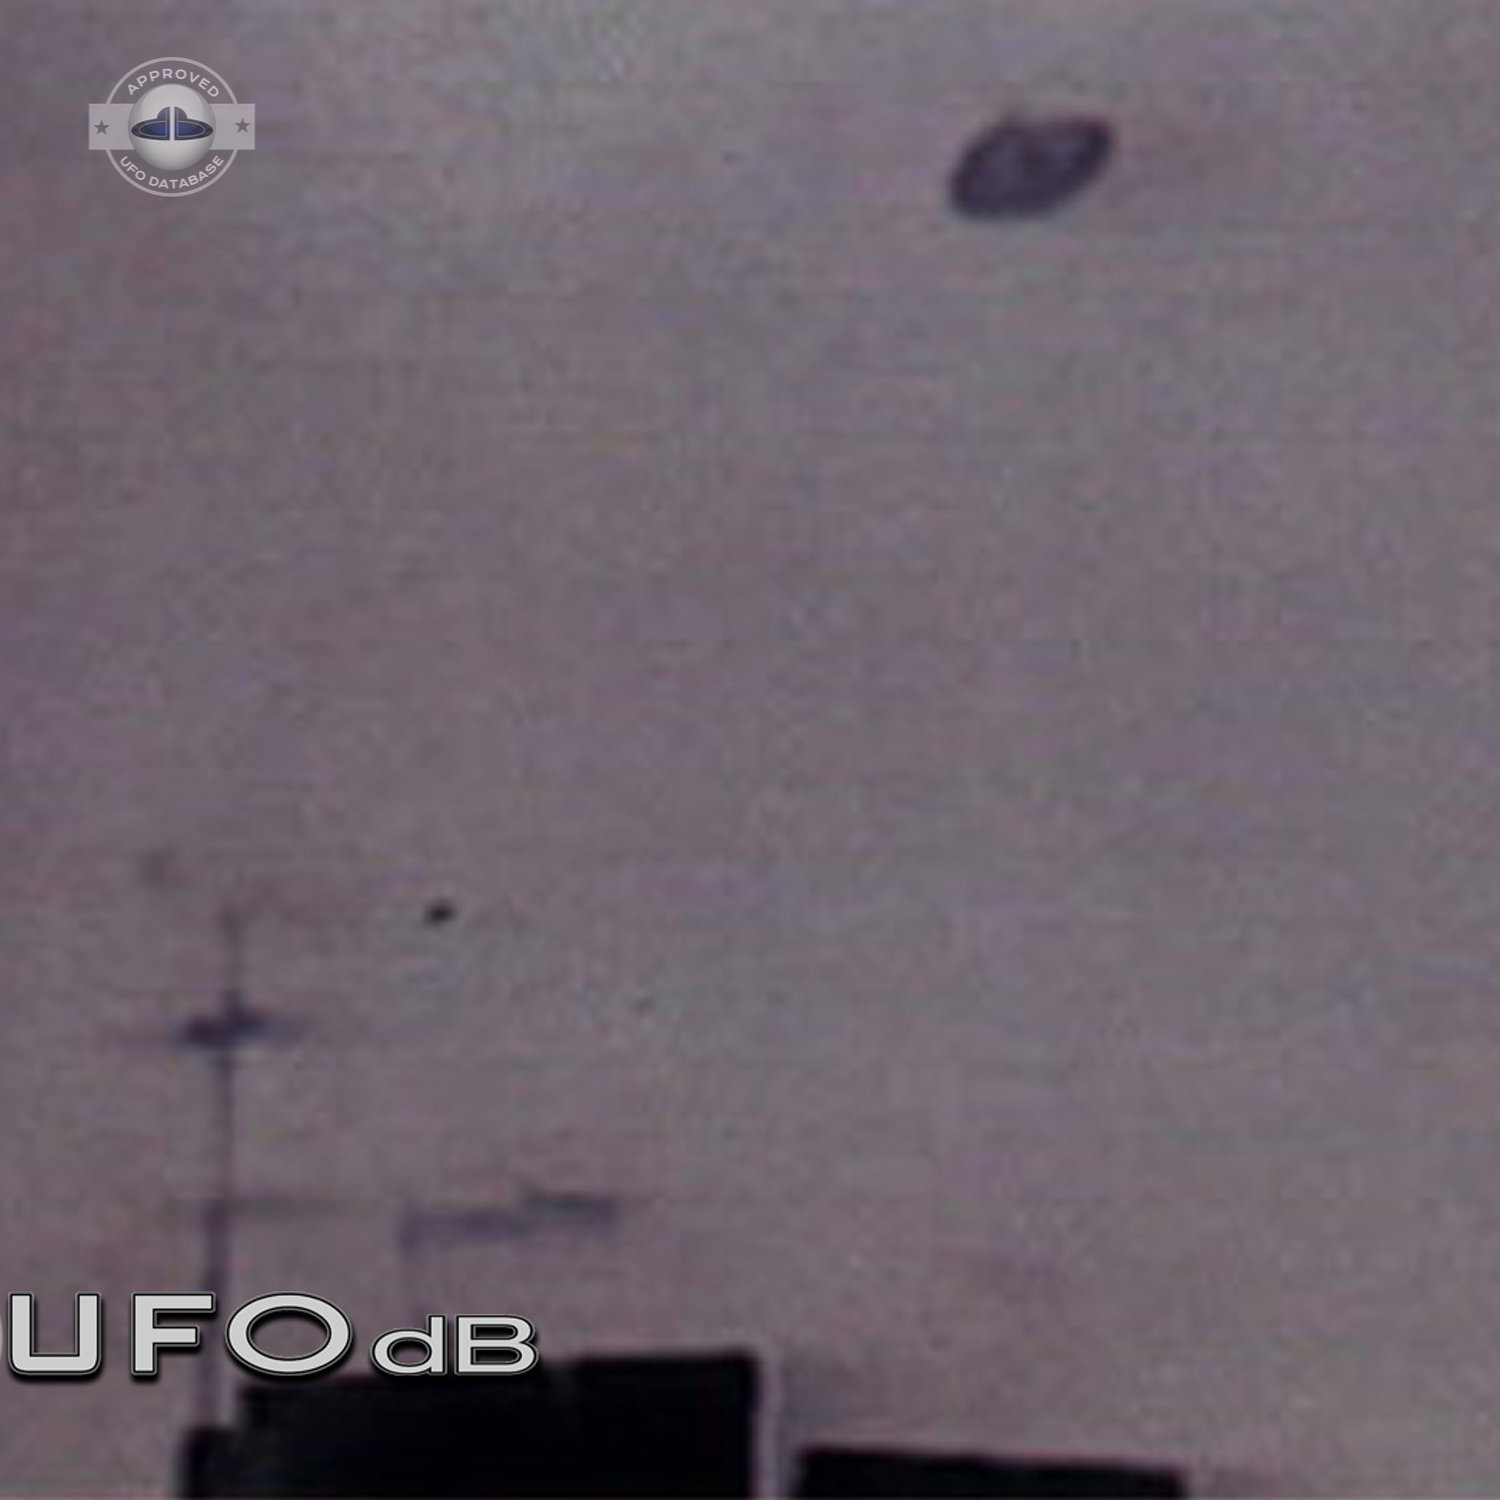 Unidentified flying object is flying over a building with antennas UFO Picture #59-2